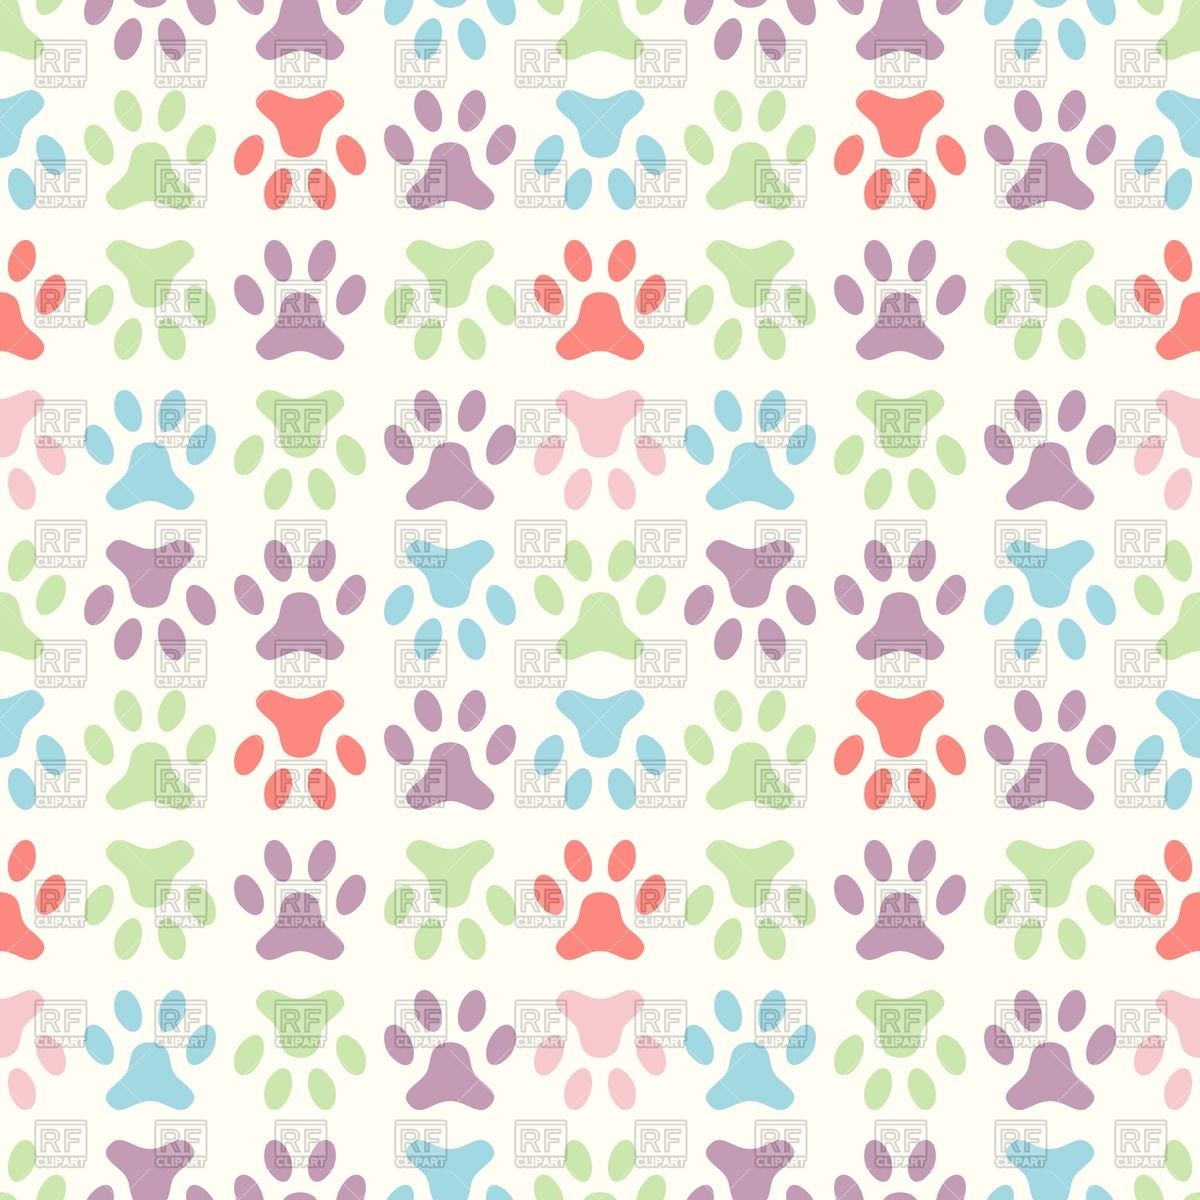 Colorful Paw Print Background Image